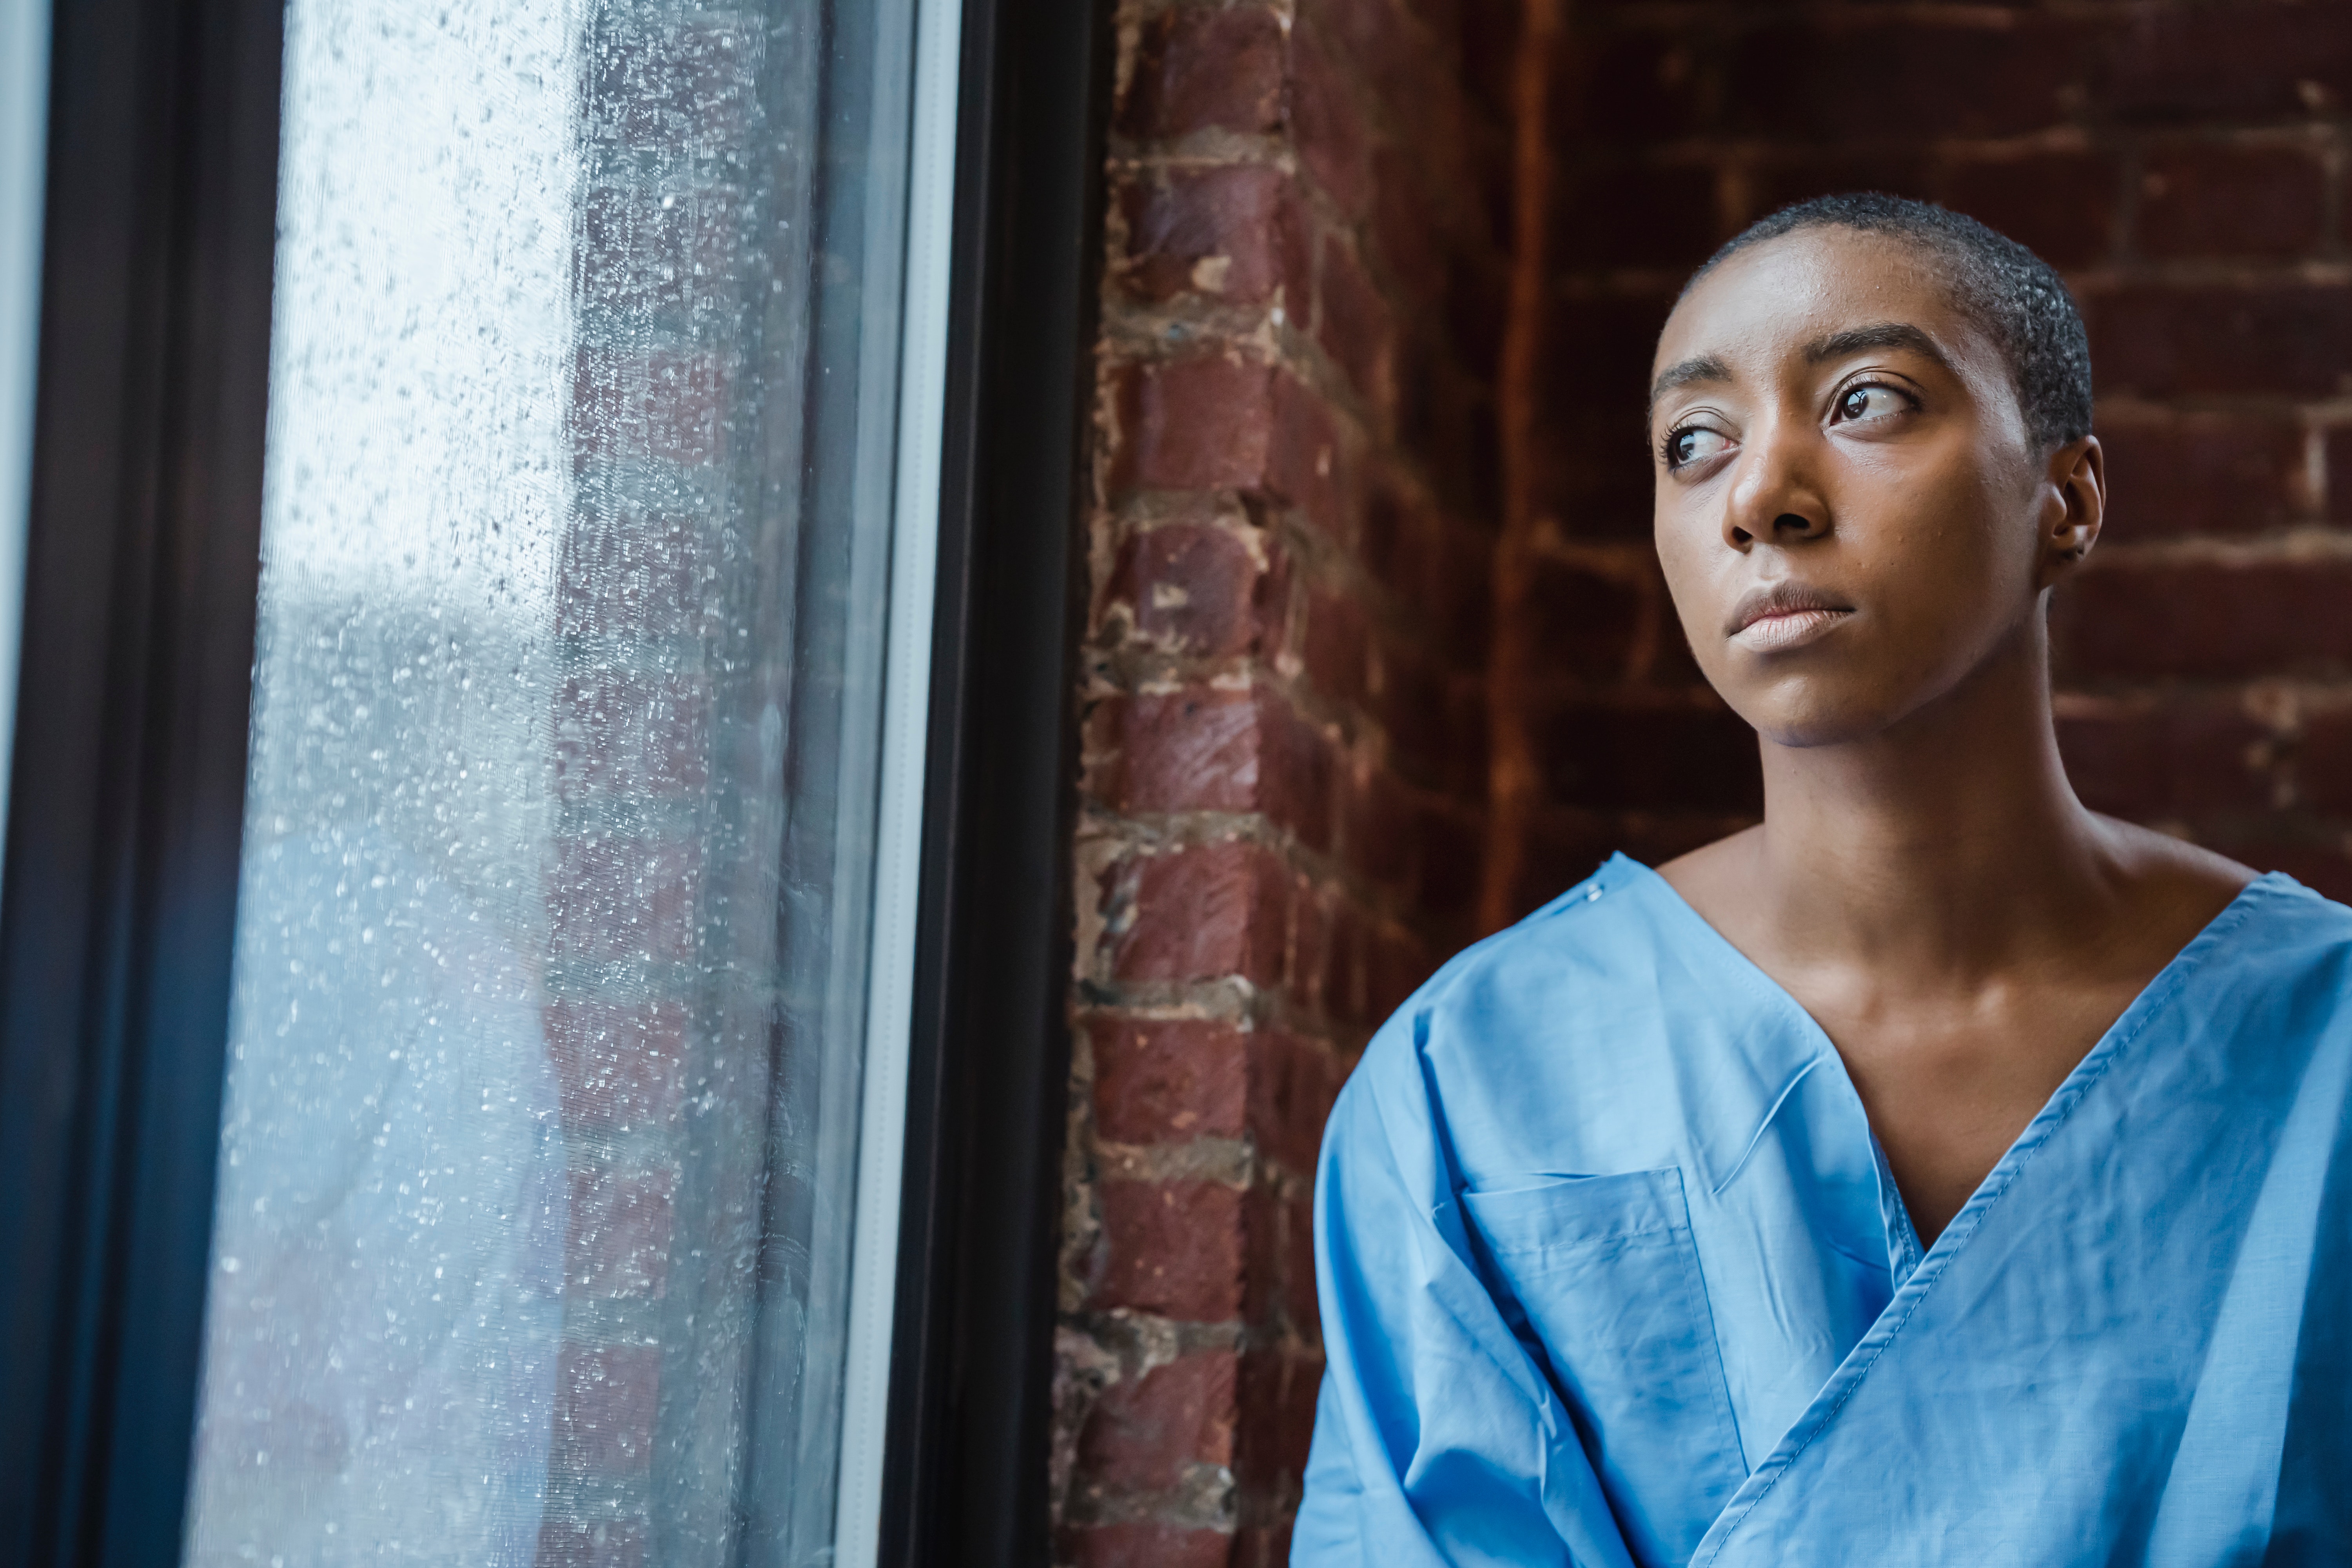 Picture of a Black woman in a hospital gown looking out of a window.